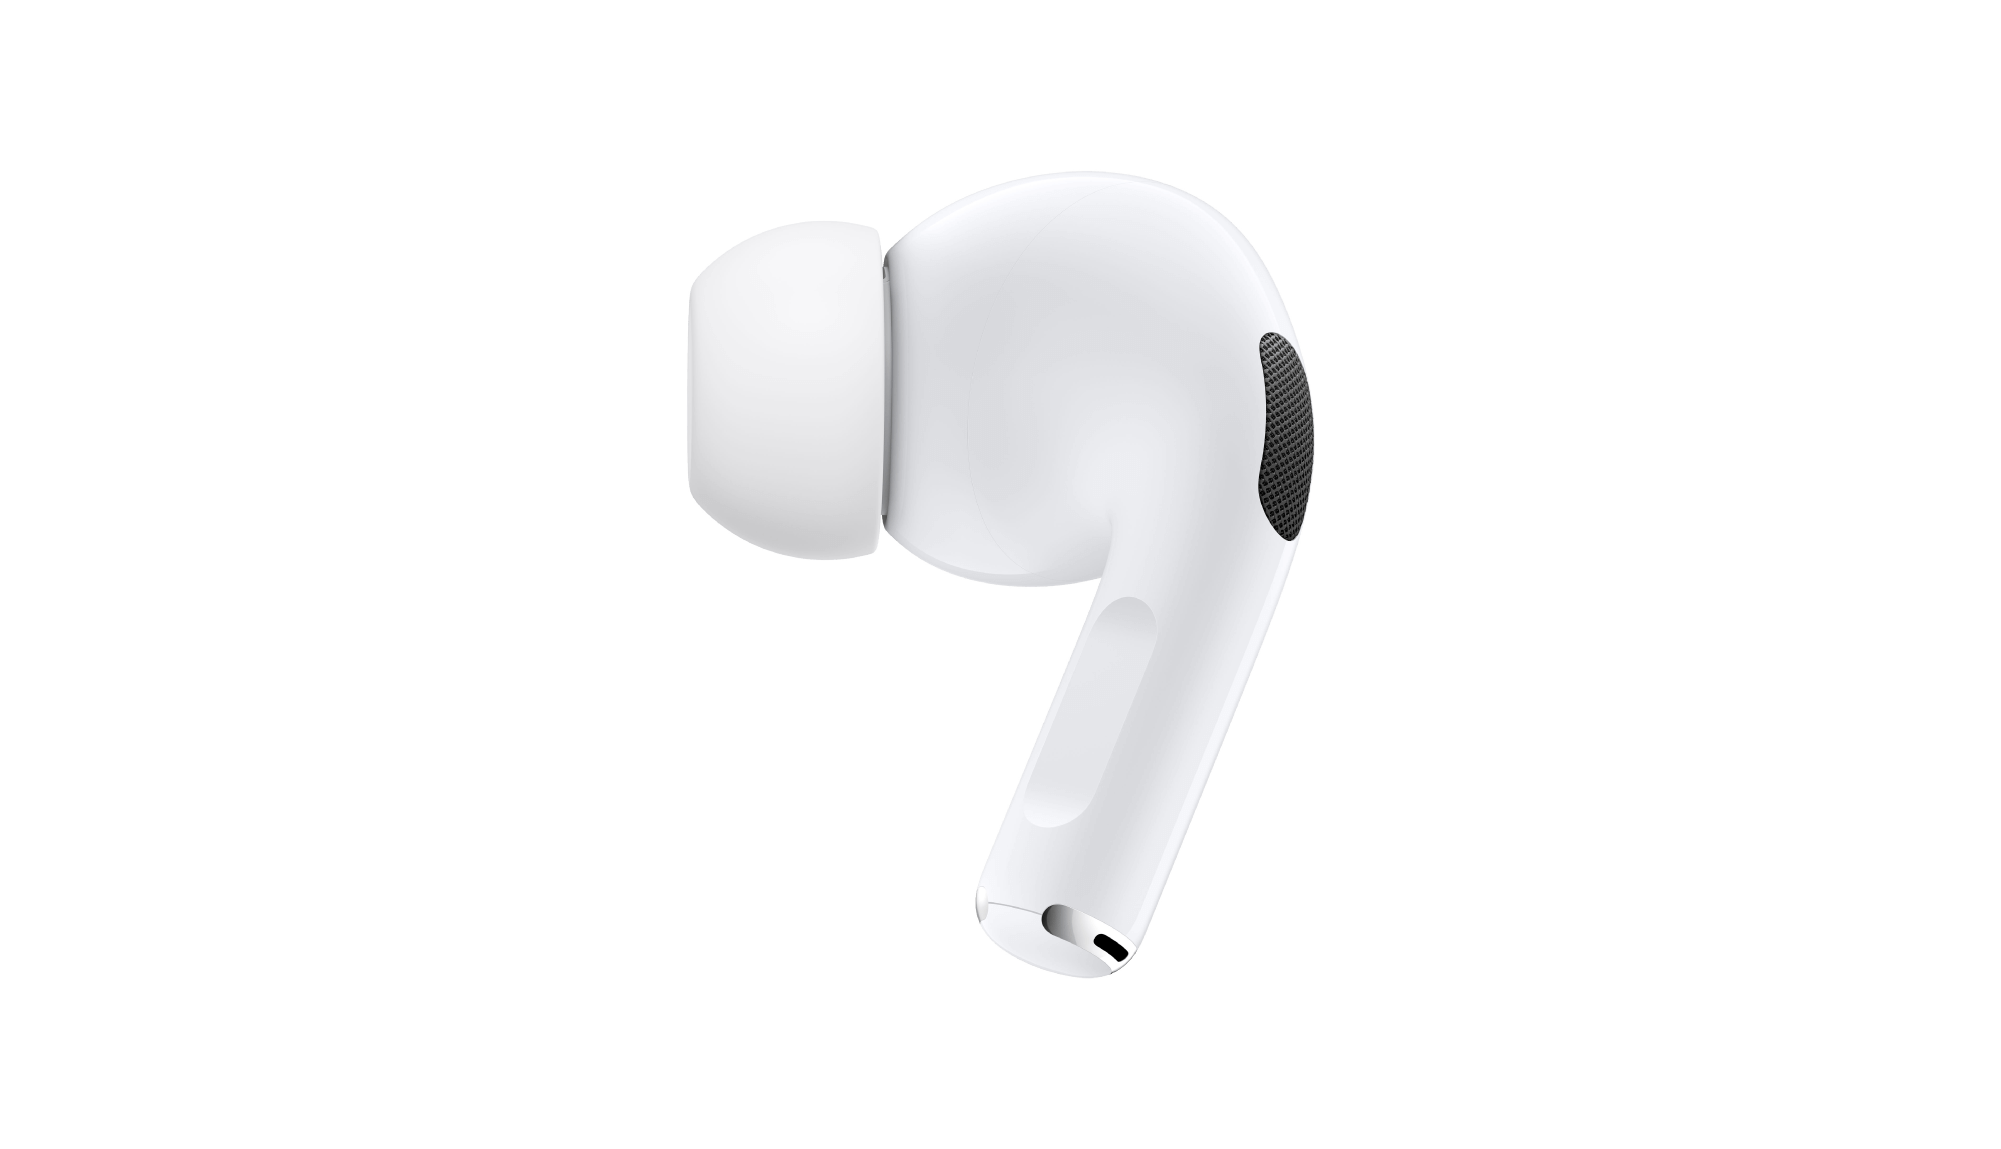 Где кнопка на наушниках. AIRPODS Pro 2nd Generation. A2190 AIRPODS. Беспроводные наушники Apple AIRPODS Pro 2. Левый наушник Apple AIRPODS Pro.